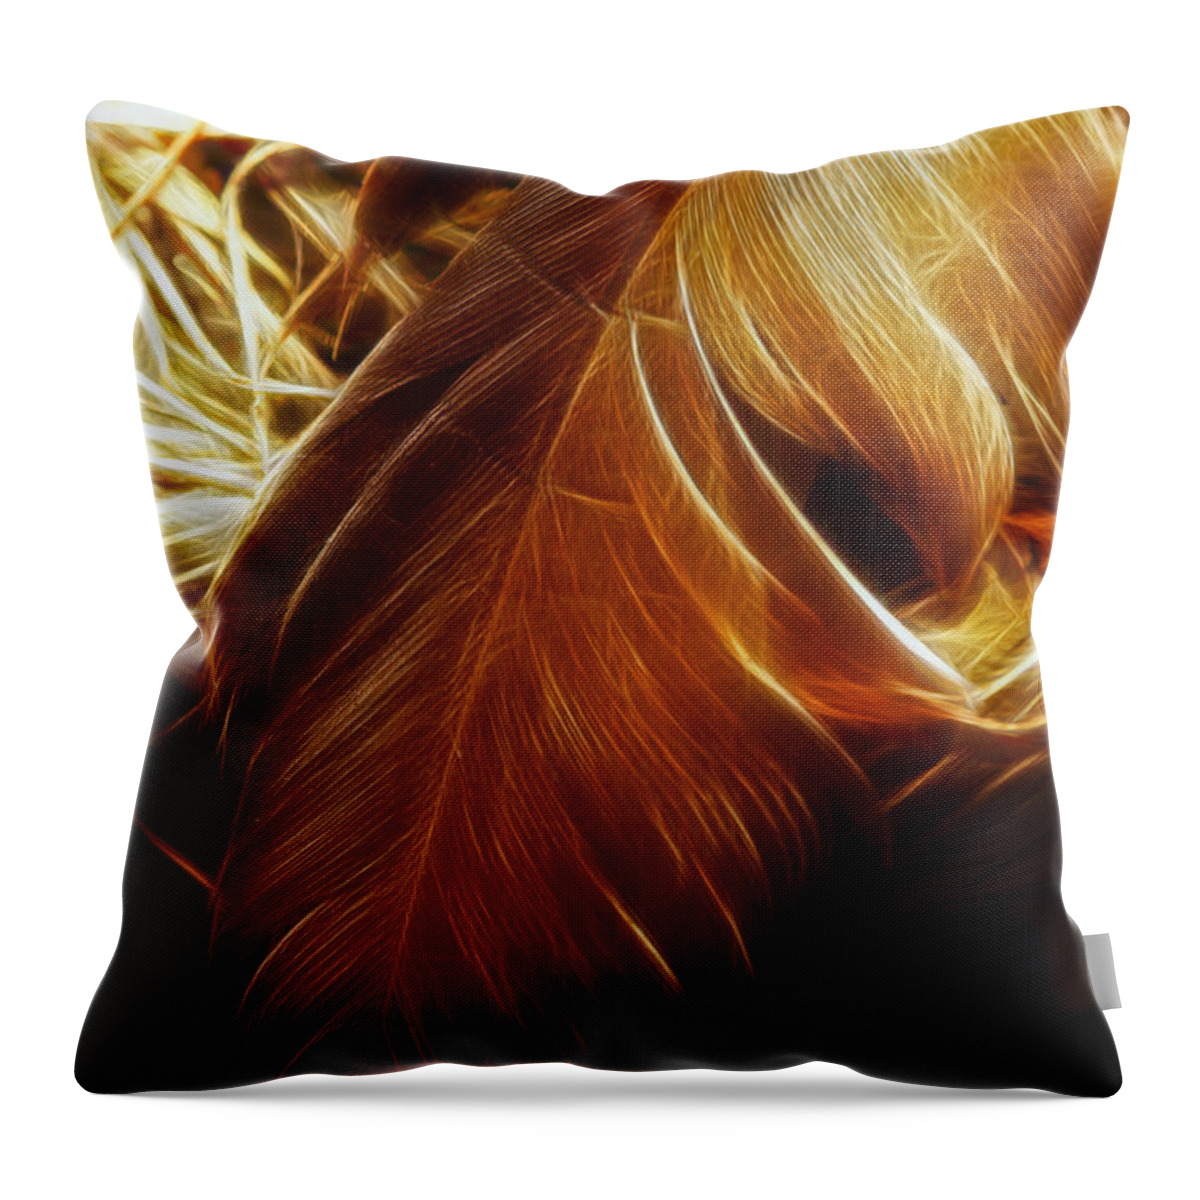 Birds Nest Throw Pillow featuring the photograph Glowing Quill by Linda Tiepelman